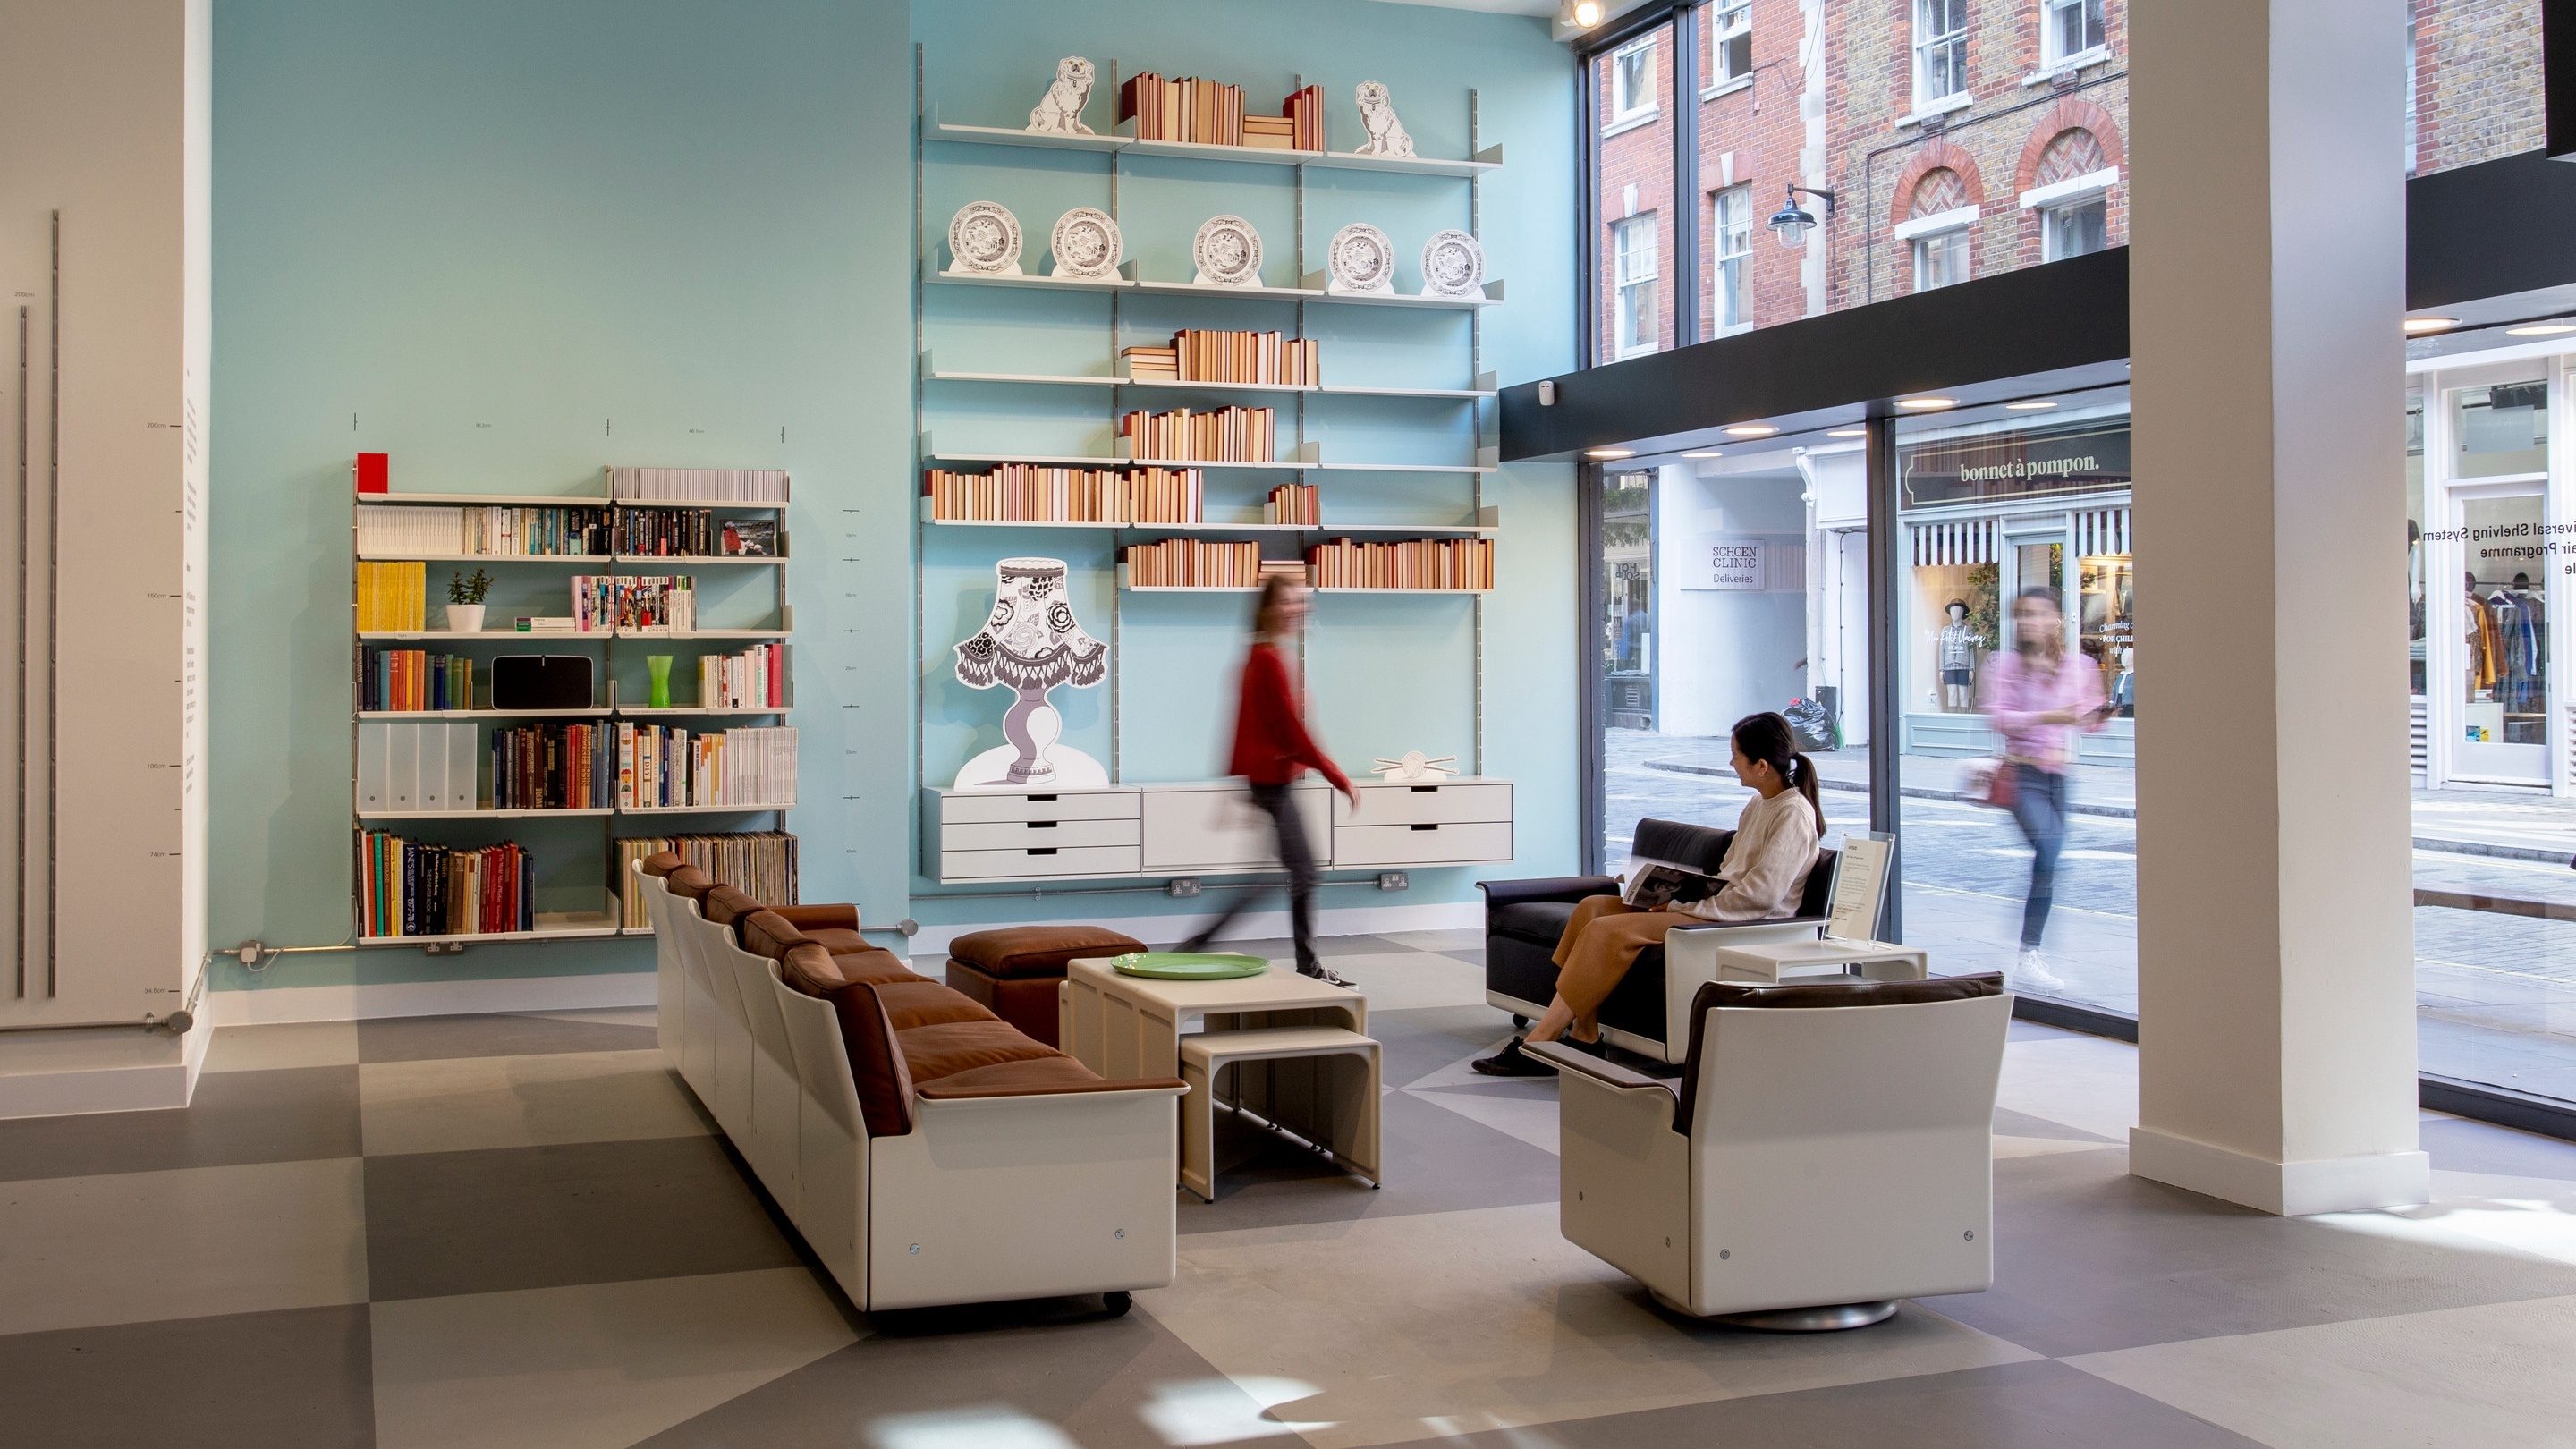 Vitsœ shop in London in Marylebone Lane, 606 shelving system and 620 chairs in the background